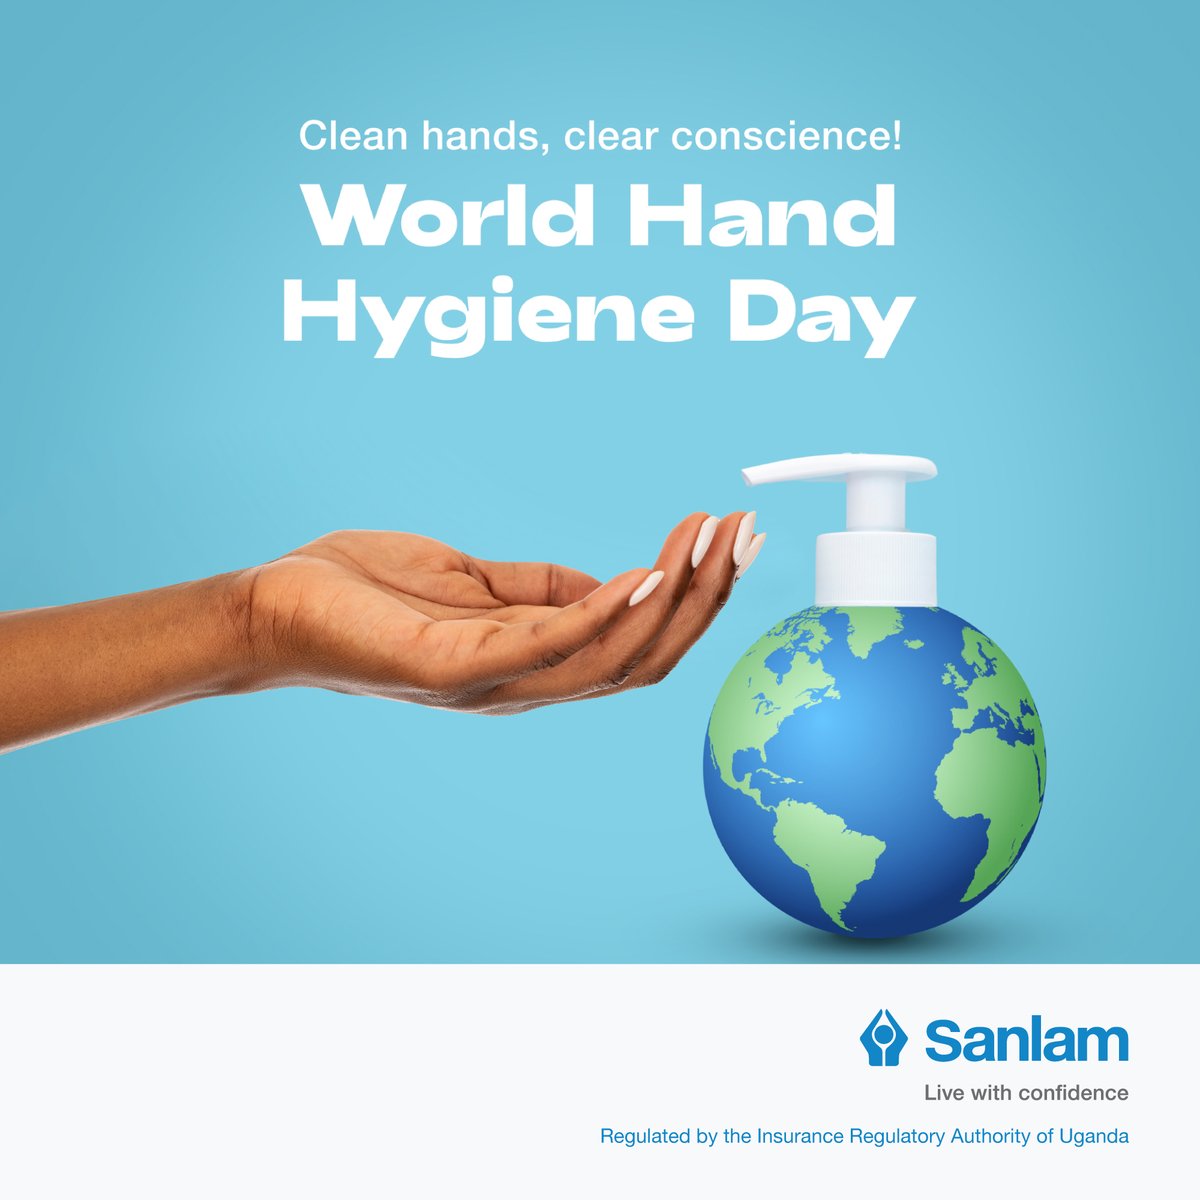 It's World Hand Hygiene Day, let's scrub-a-dub-dub for a healthier, happier world. #WorldHandHygieneDay24 #LiveWithConfidence